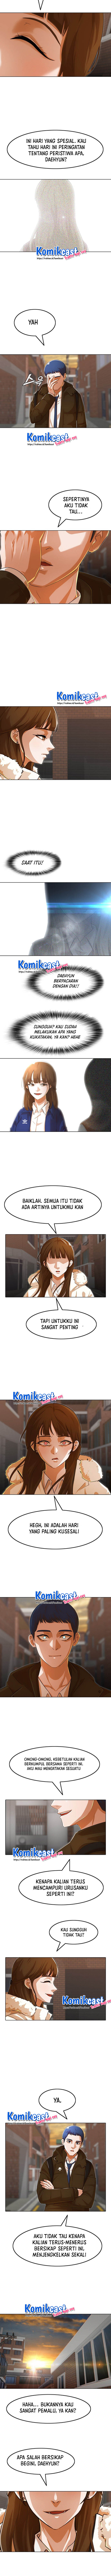 The Girl from Random Chatting! Chapter 144